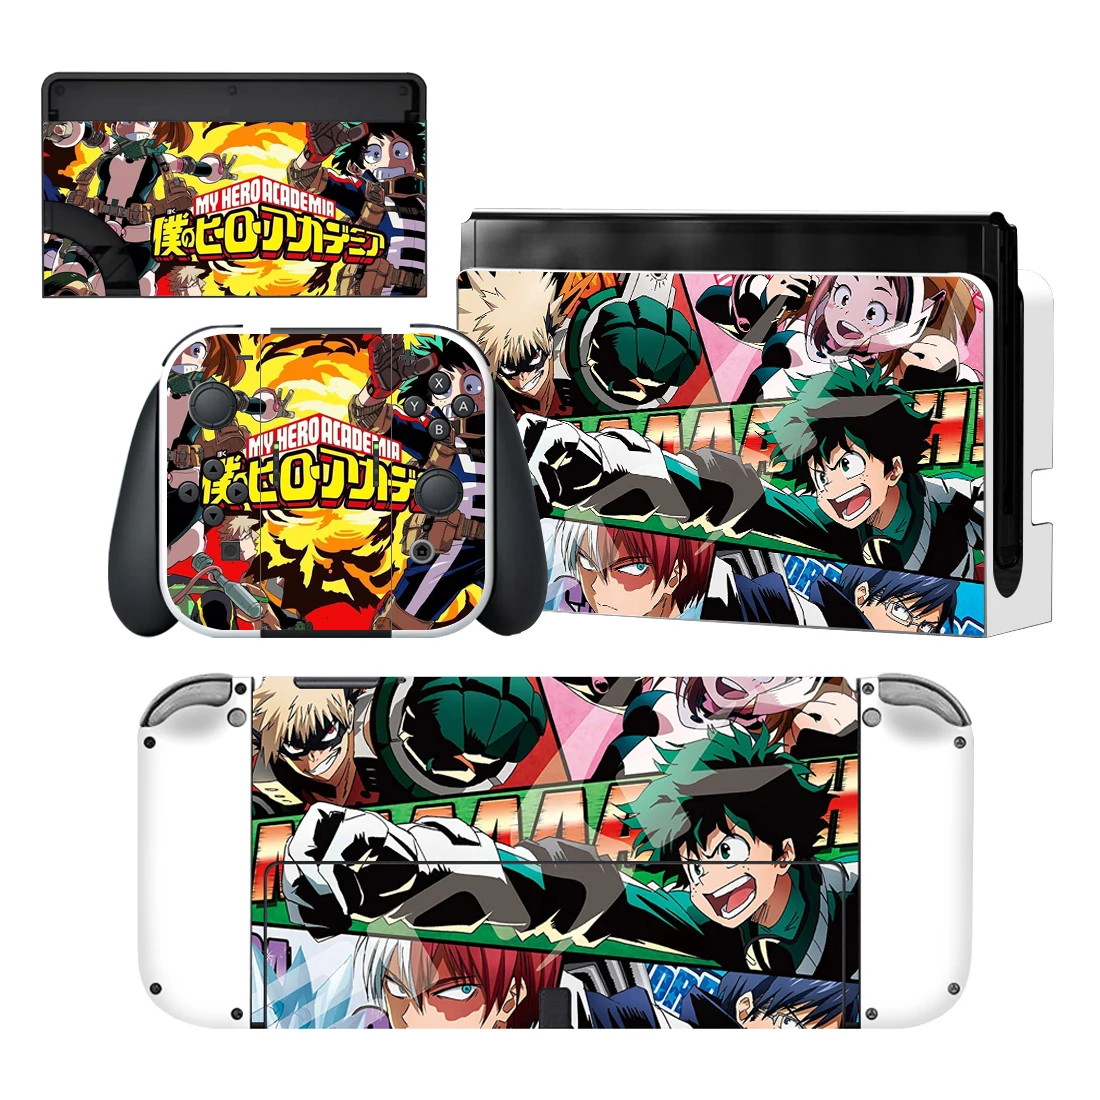 

My Hero Academia Nintendoswitch Skin Cover Sticker Decal for Nintendo Switch OLED Console Joy-con Controller Dock Skin Vinyl